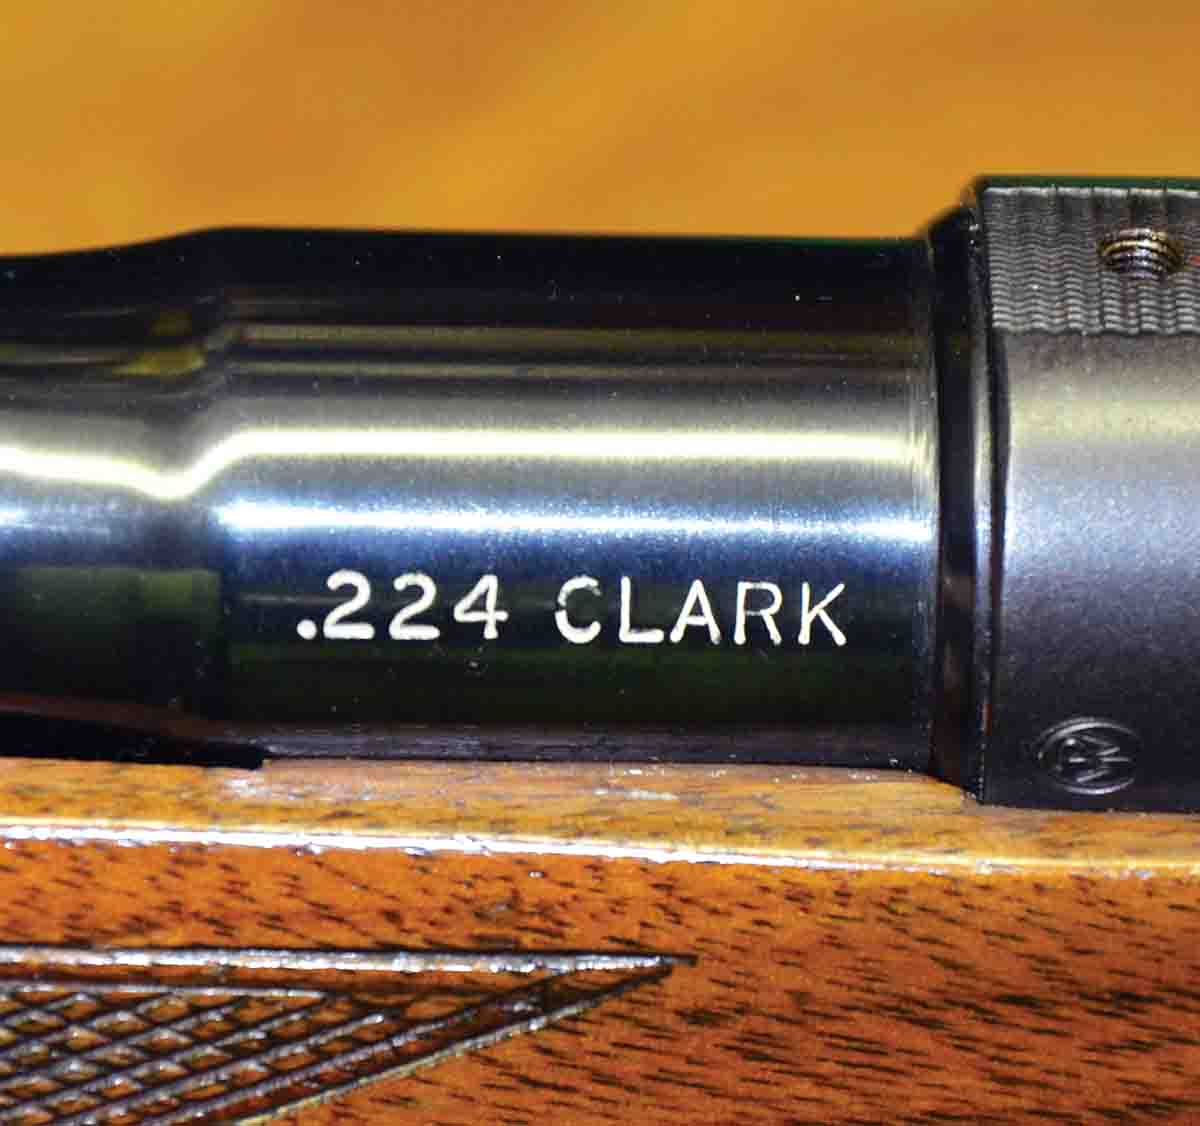 When rebarreling a rifle, Clark often used Shilen heavy, 26-inch barrels. Layne intended to use his Model 7 for picking off feral pigs at great distances, and since a great deal of walking was required, he opted for a medium-heavy barrel with a muzzle diameter of .755 inch.